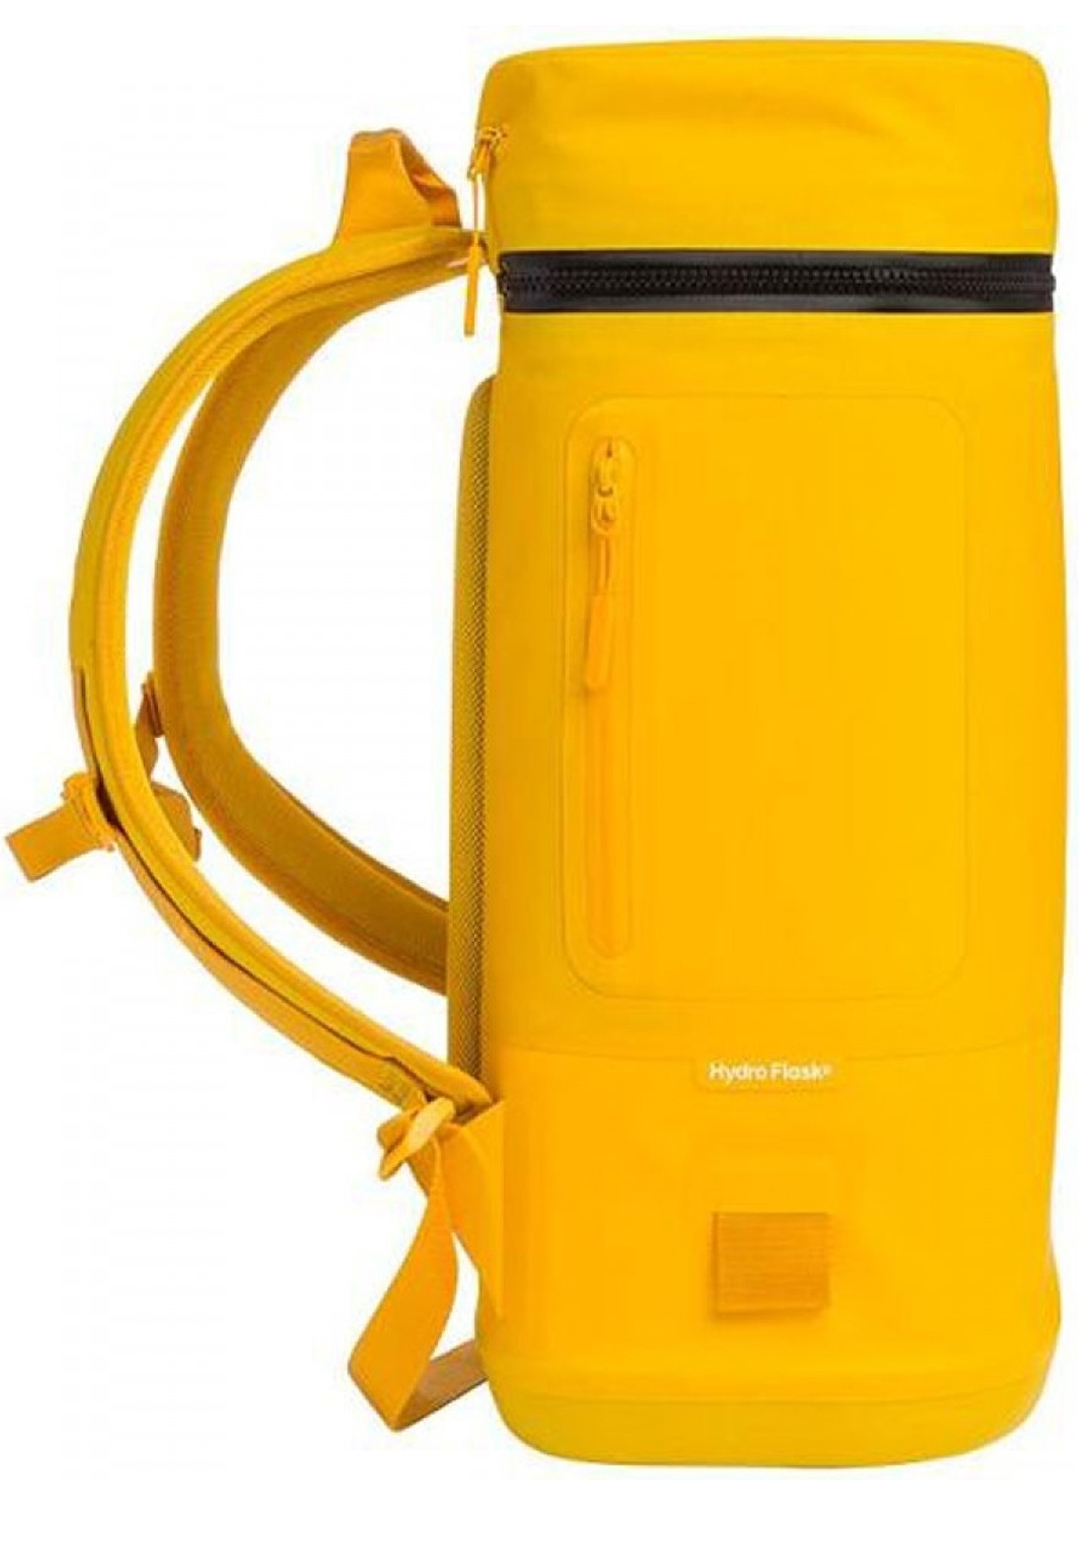 Hydro Flask Unbound Cooler Backpack 22L Goldenrod Yellow side